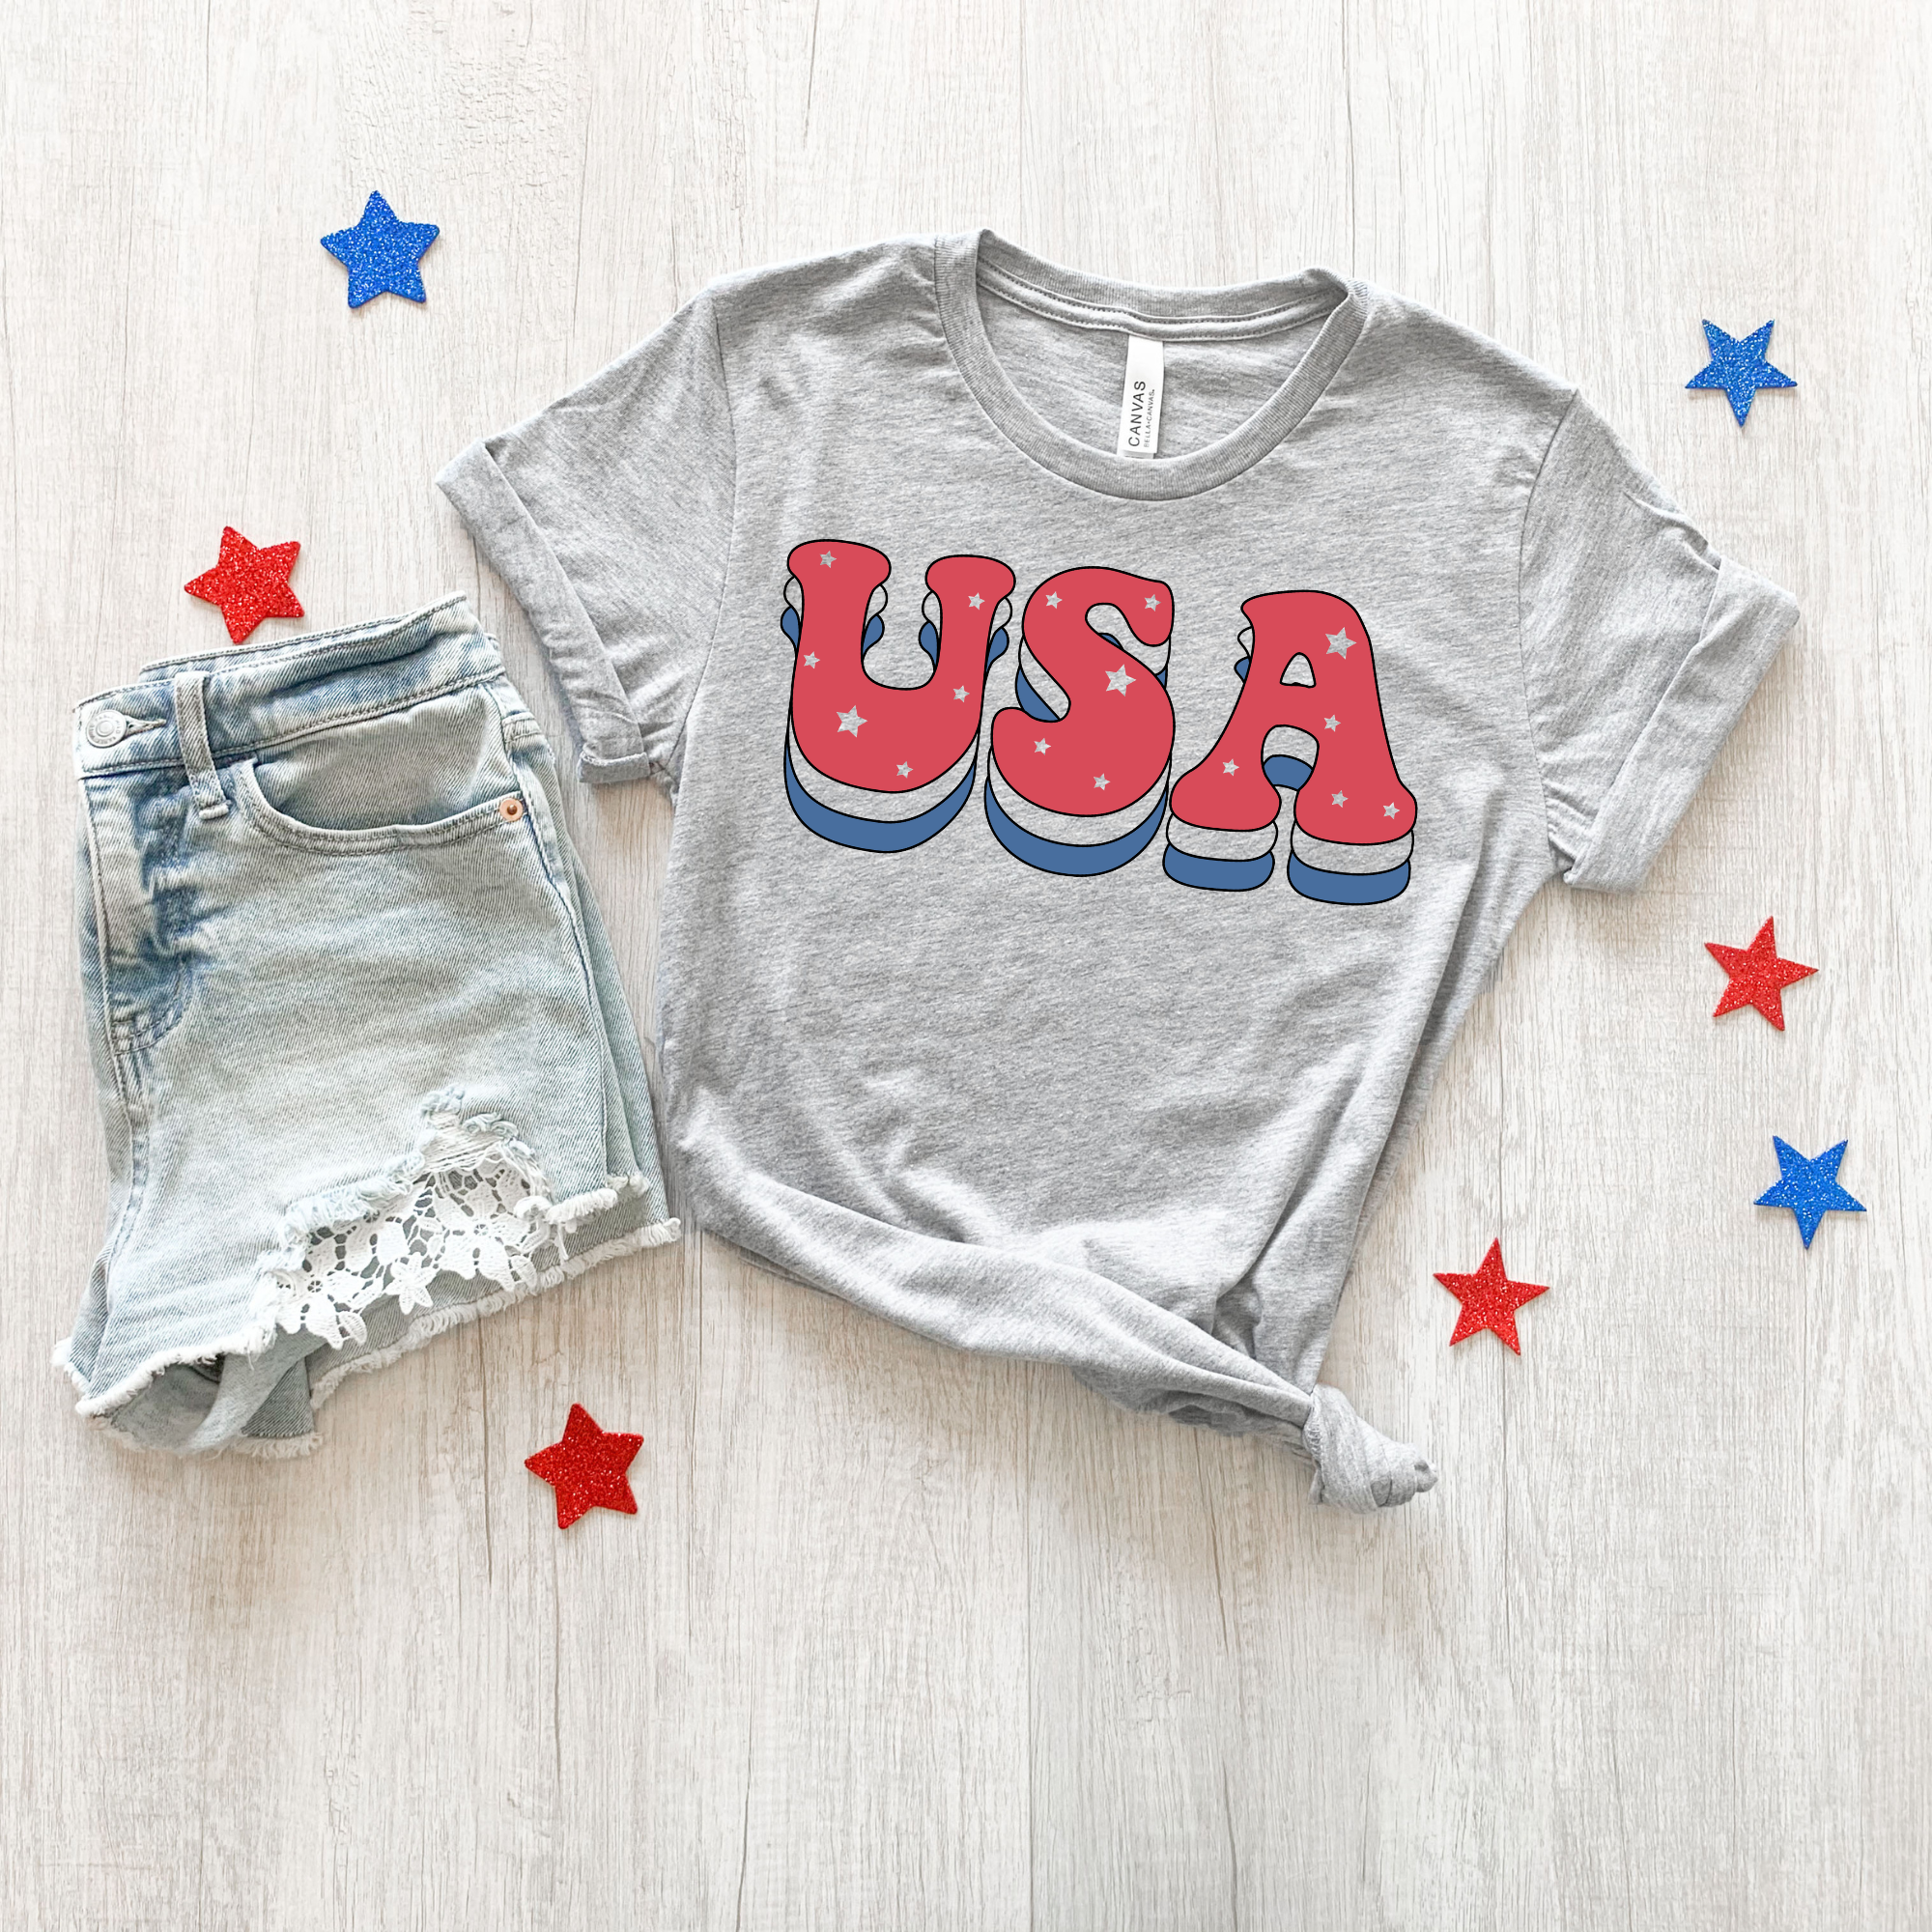 USA Bubble T Shirt for 4th Of July *UNISEX FIT*-Graphic Tees-208 Tees Wholesale, Idaho